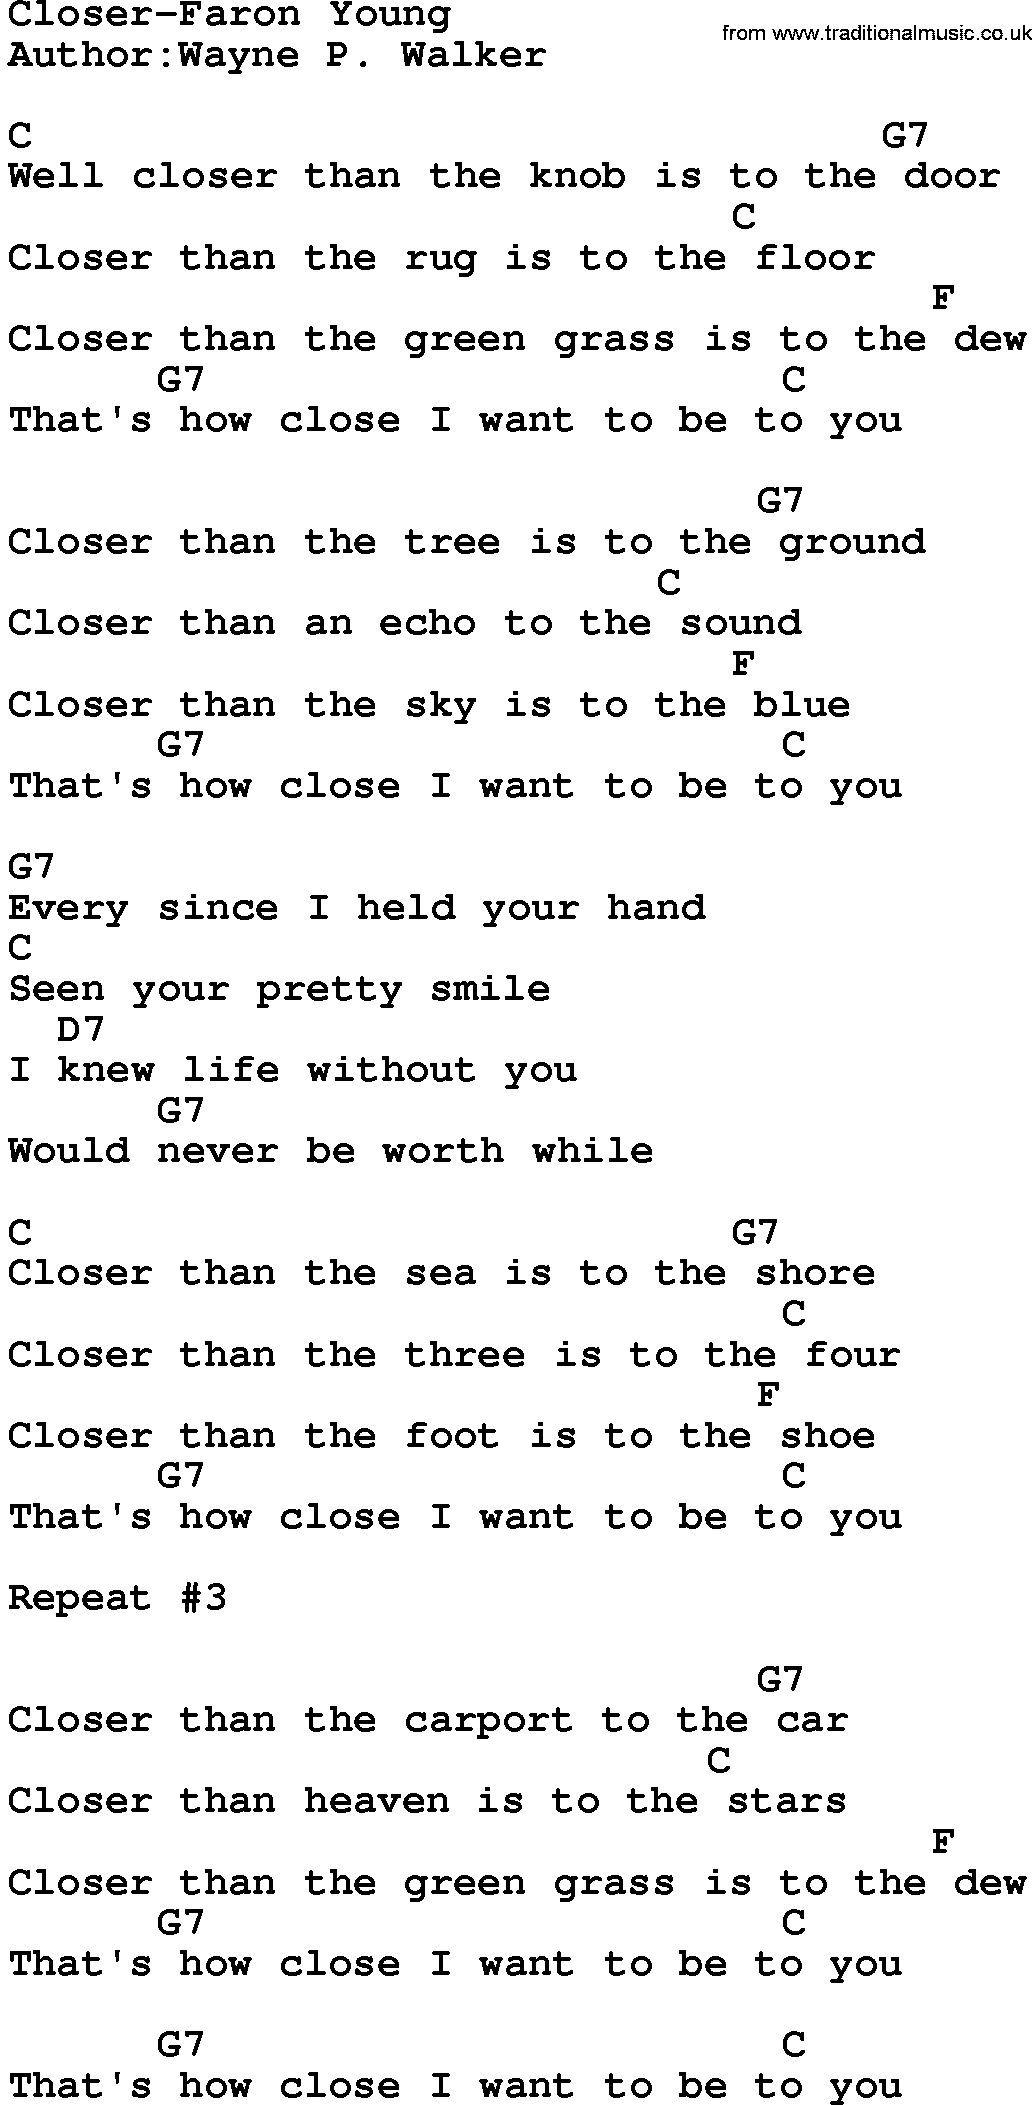 Country music song: Closer-Faron Young lyrics and chords